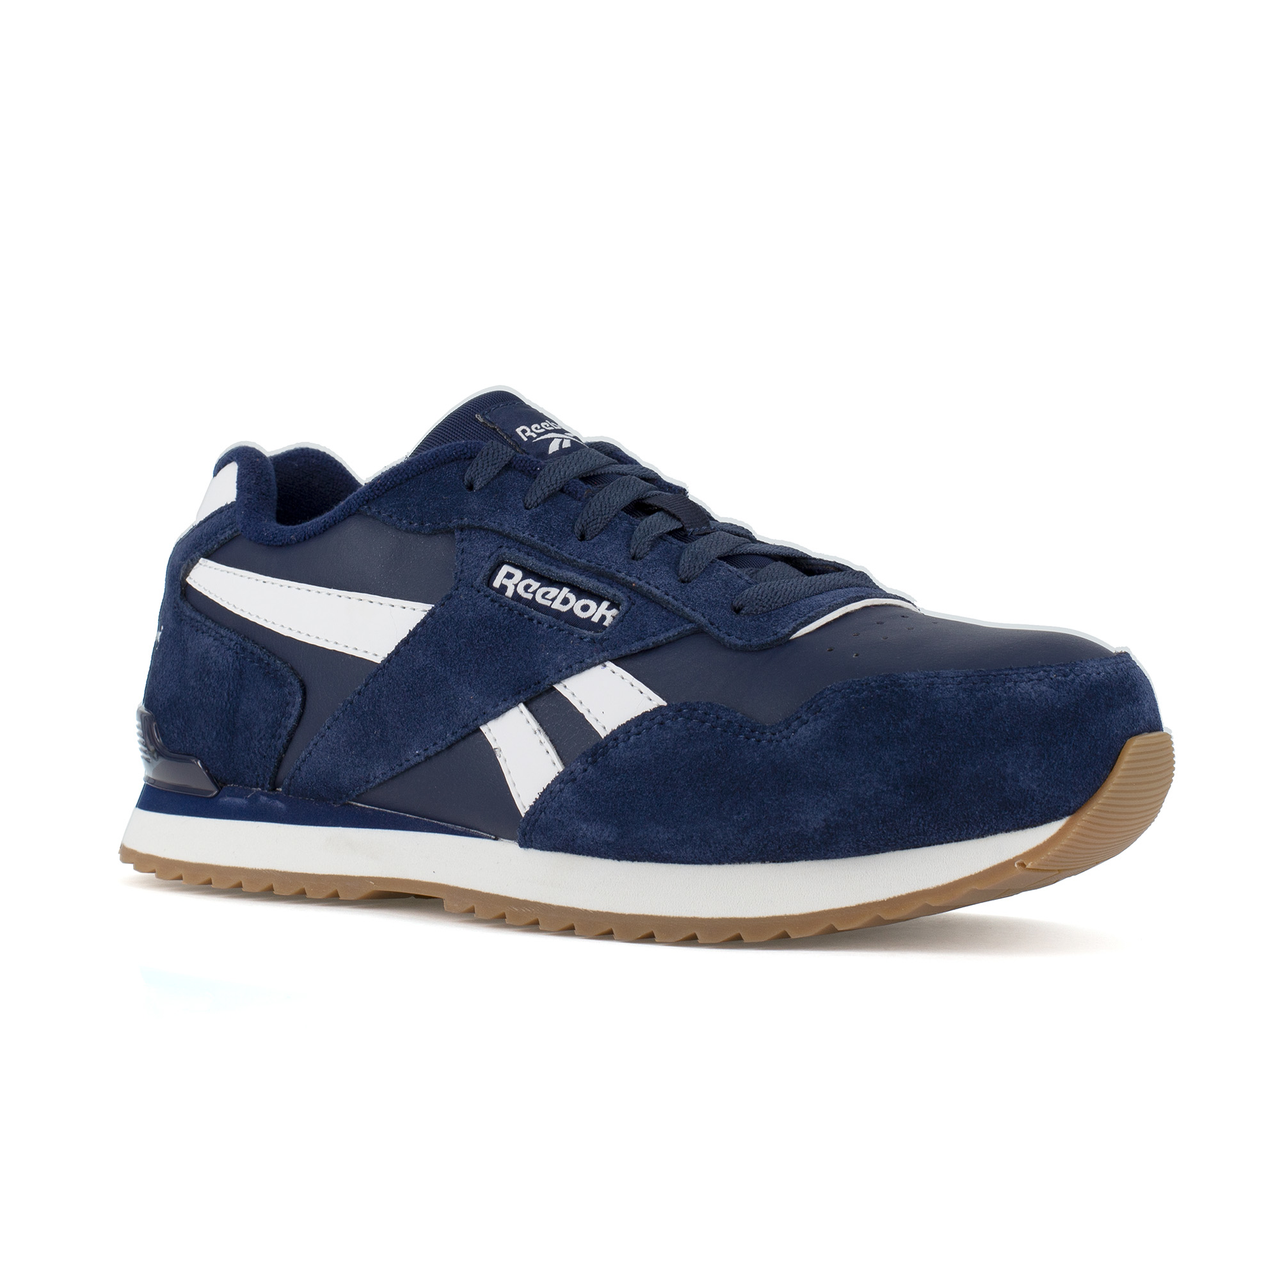 RB1981 Reebok Work Sneaker Composite Toe (Navy and White)